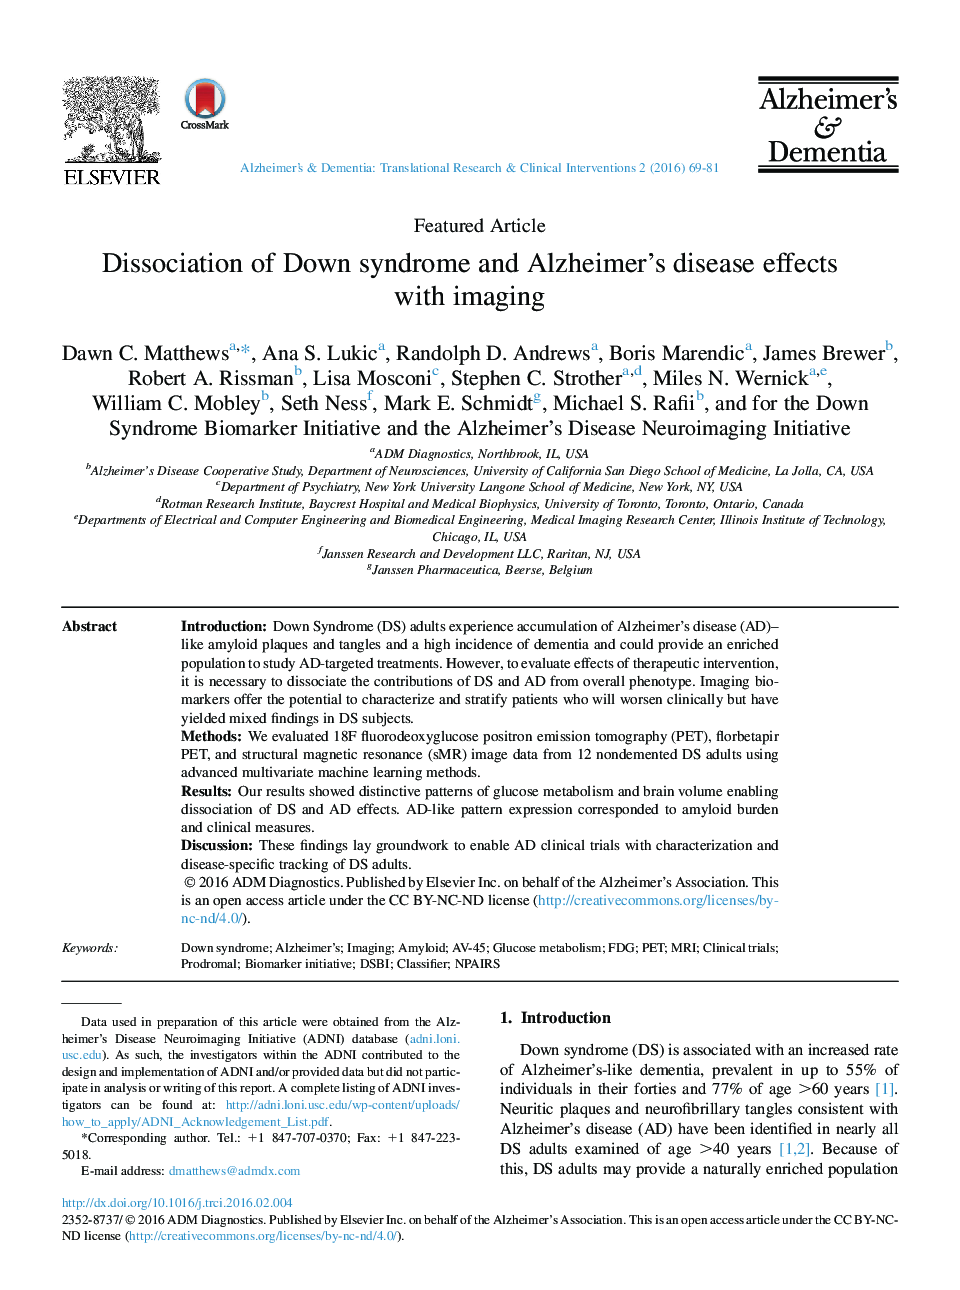 Dissociation of Down syndrome and Alzheimer's disease effects with imaging 